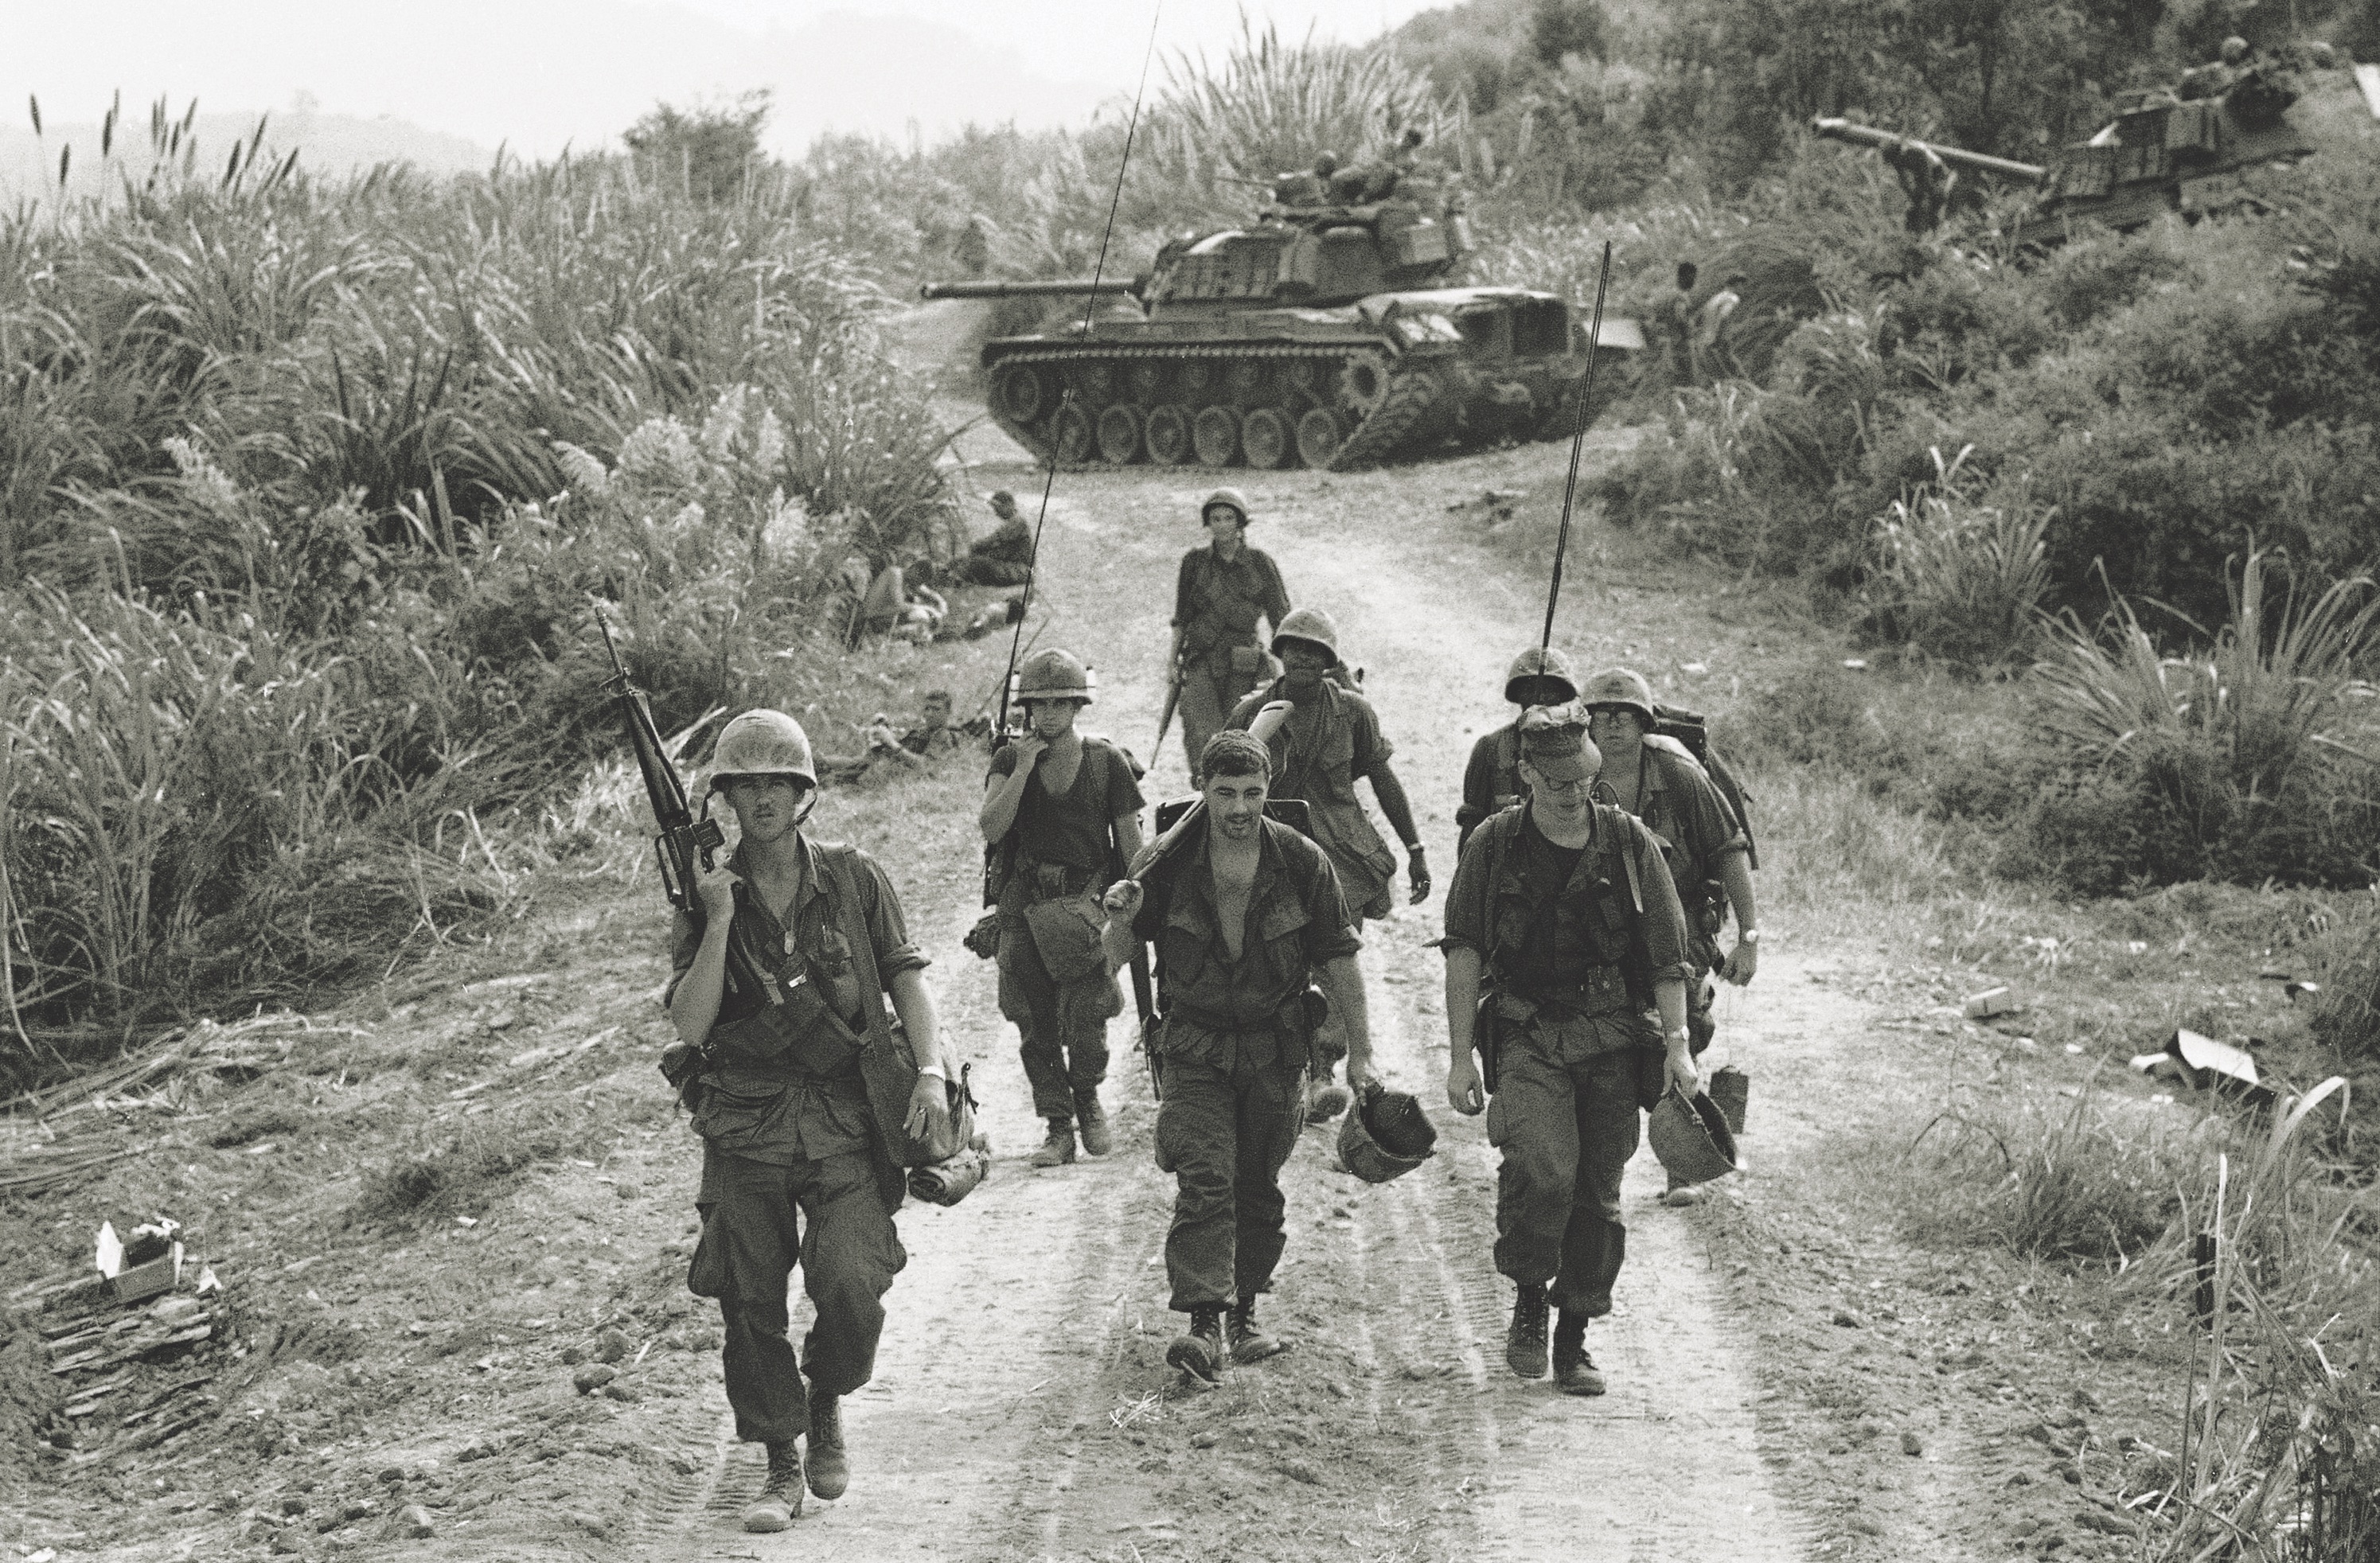 Marines advance on Highway 9 in April 1968 in an operation that ended the NVA siege at Khe Sanh. (AP Photo)